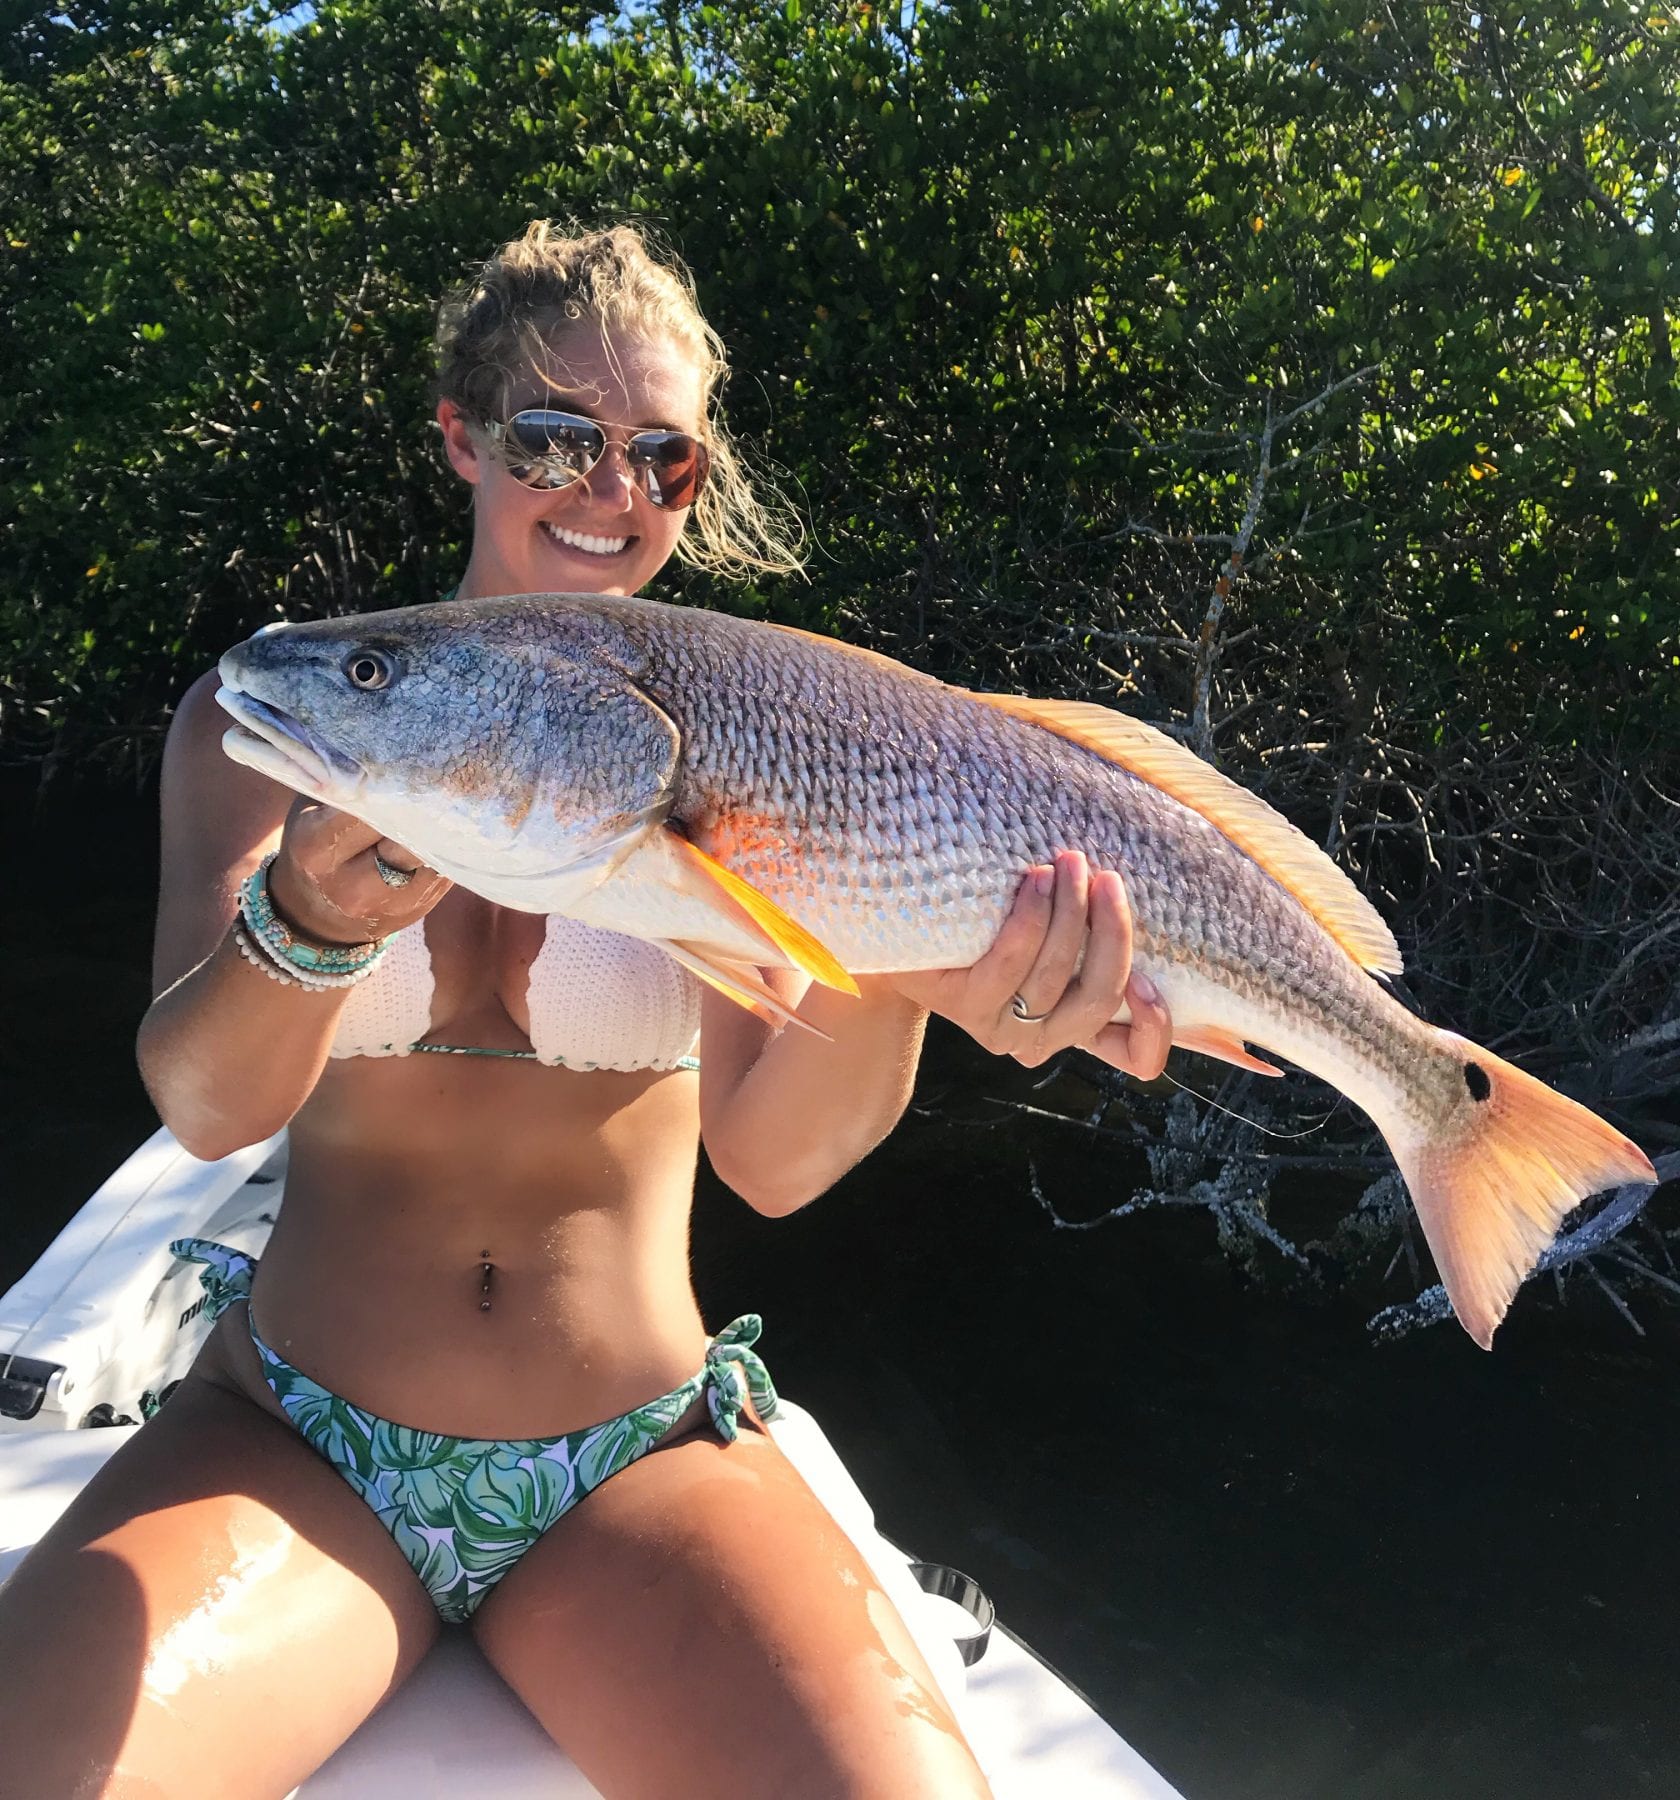 amy hofer add cami cakes fishing photo